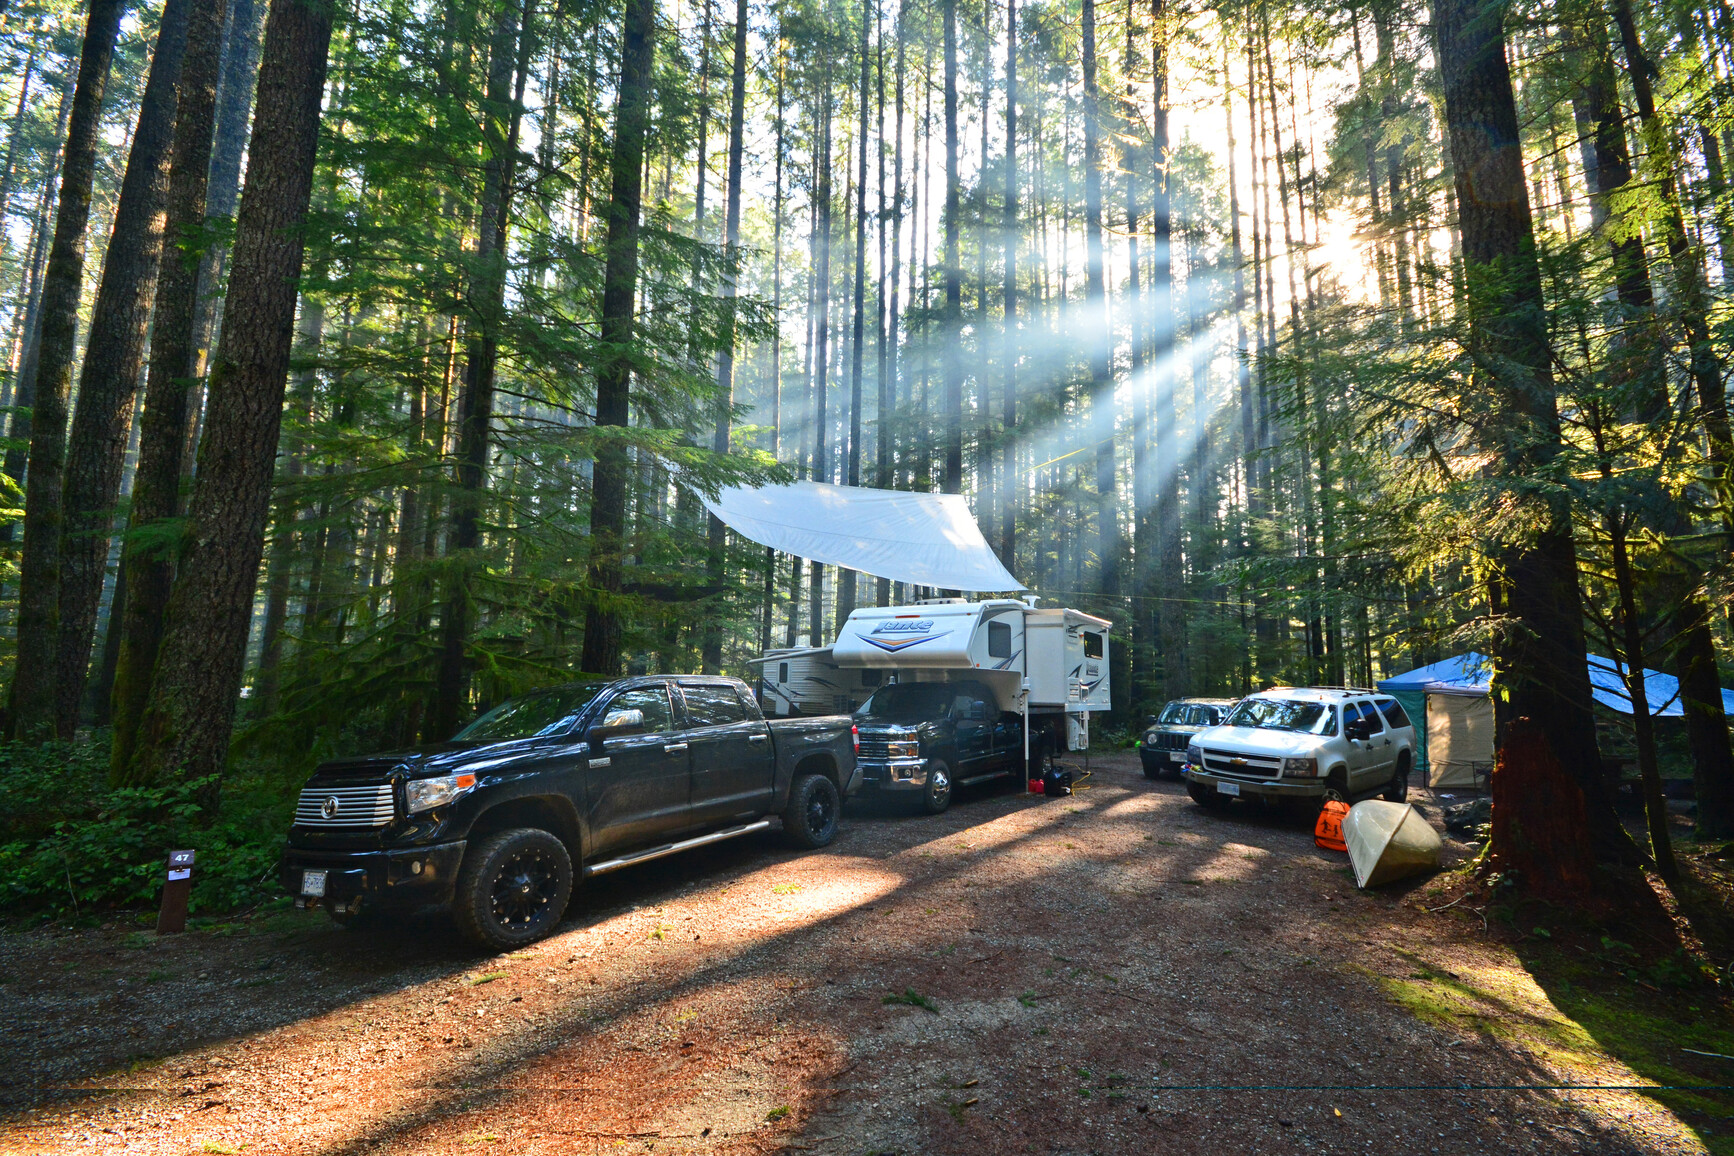 Campsite with rv's and vehicles.